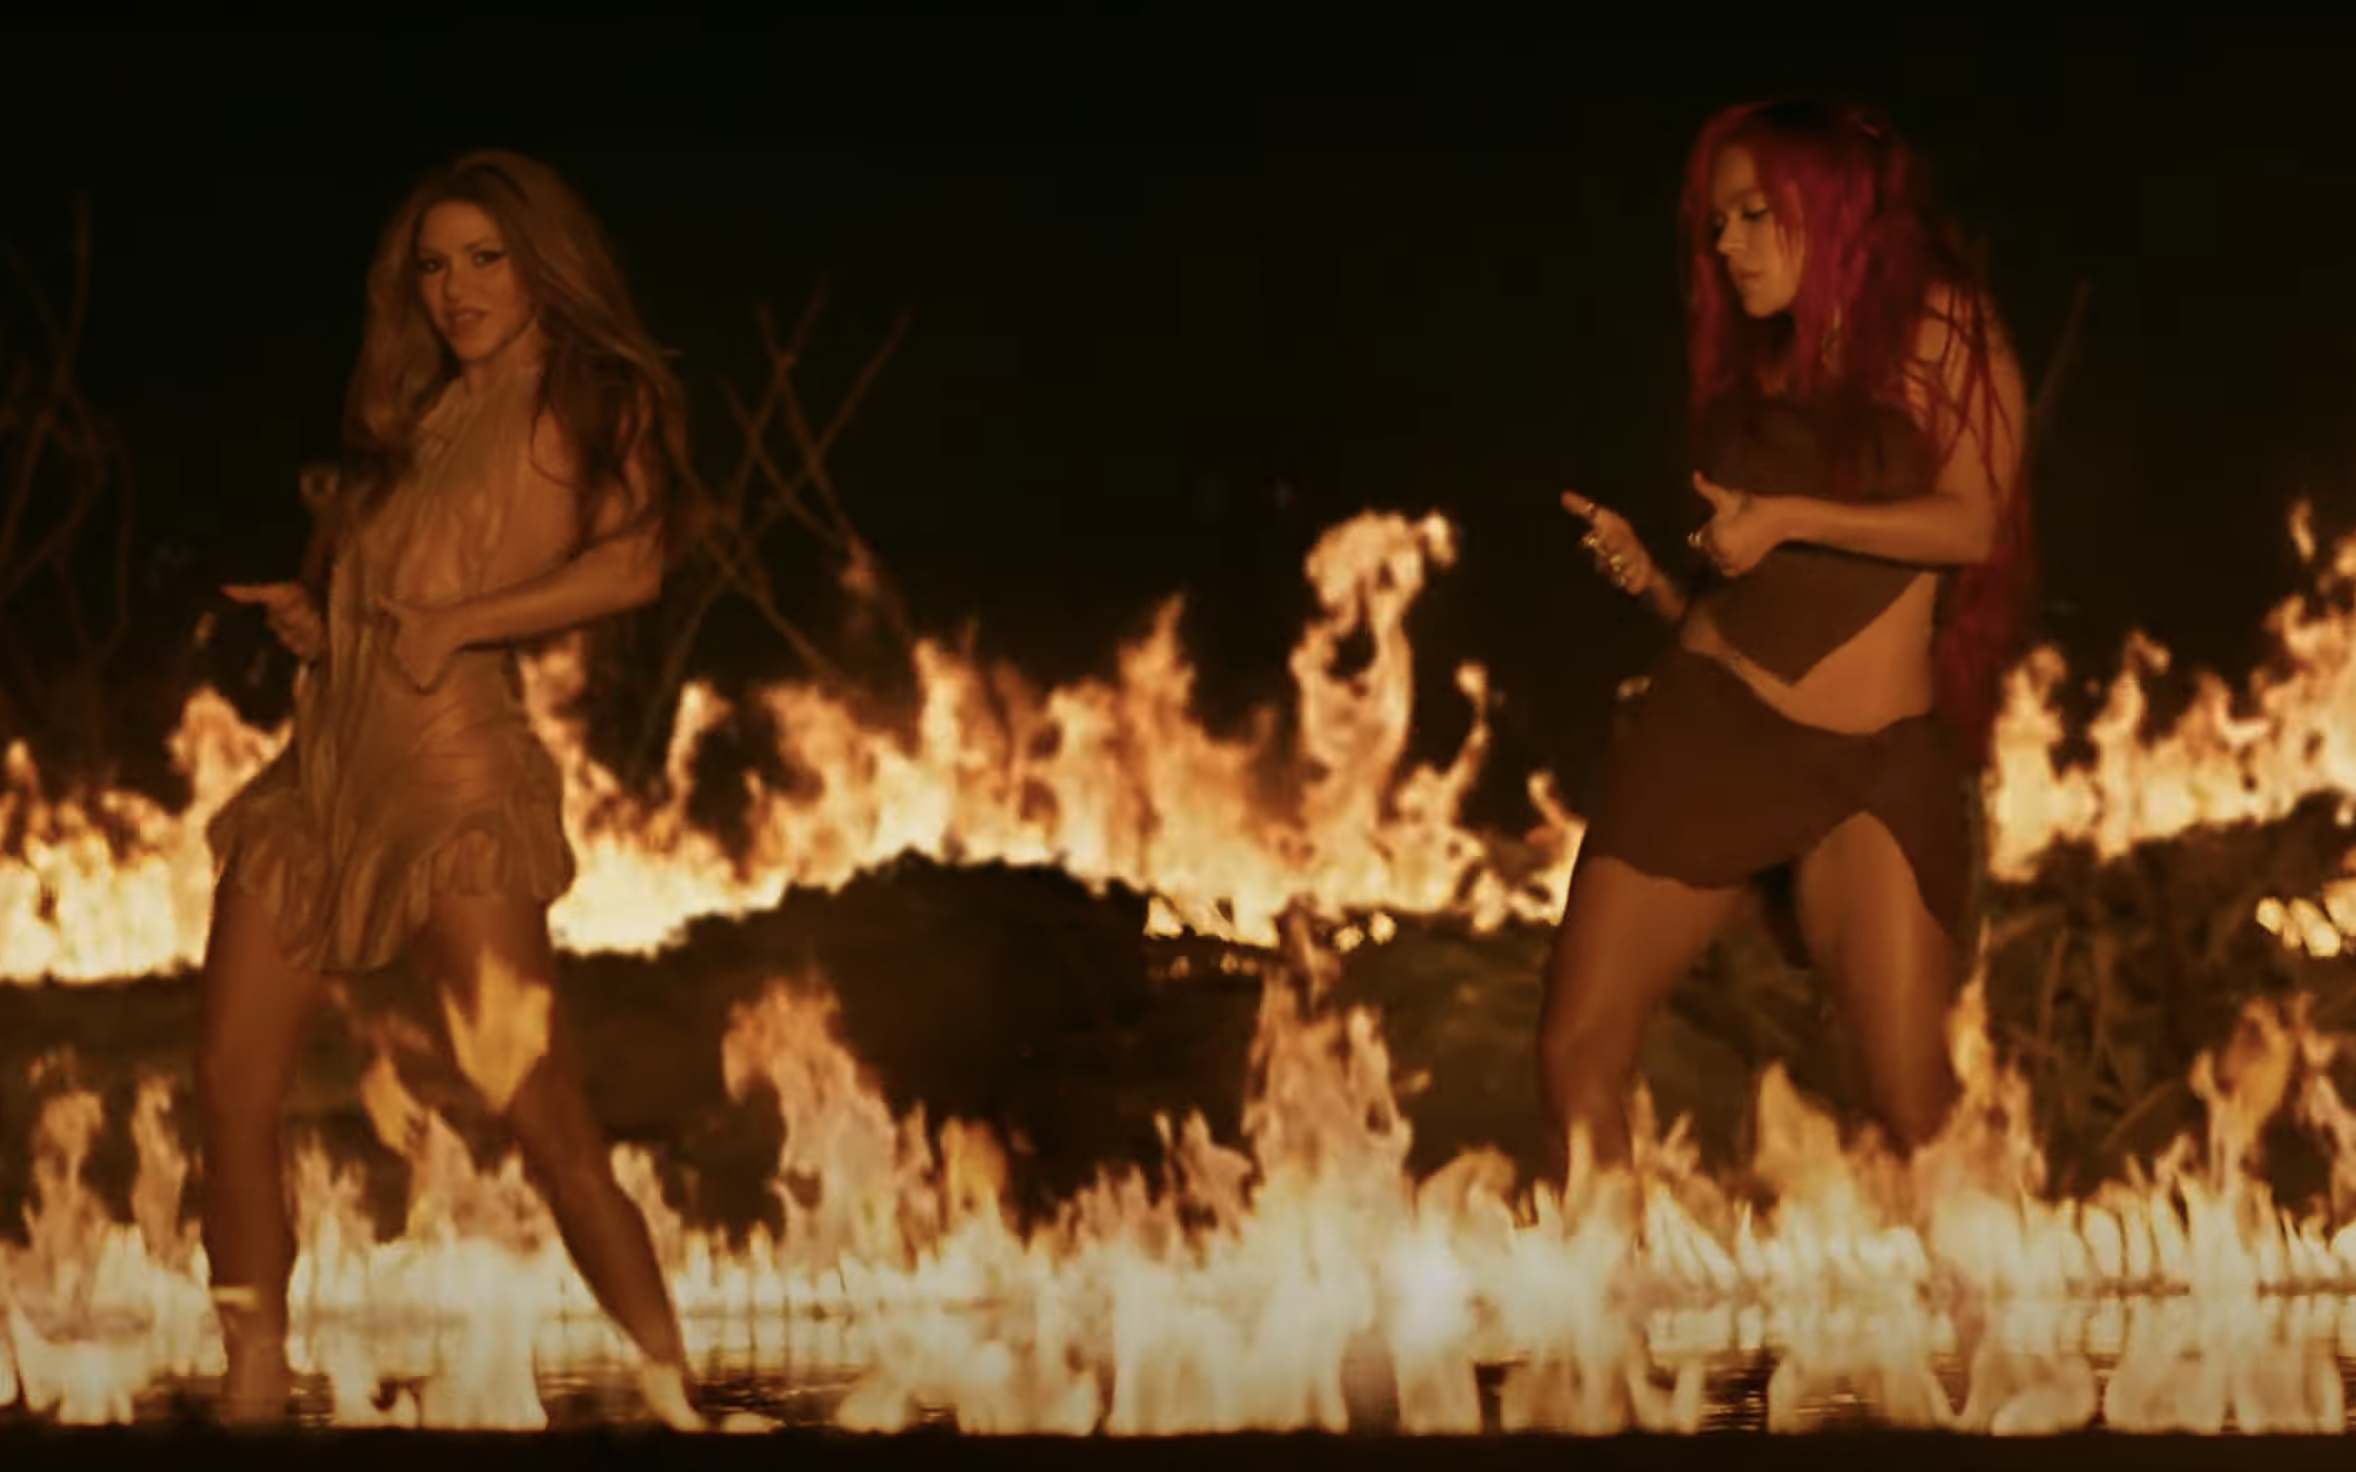 Screenshot of Shakira and Karol from the video, with flames behind them